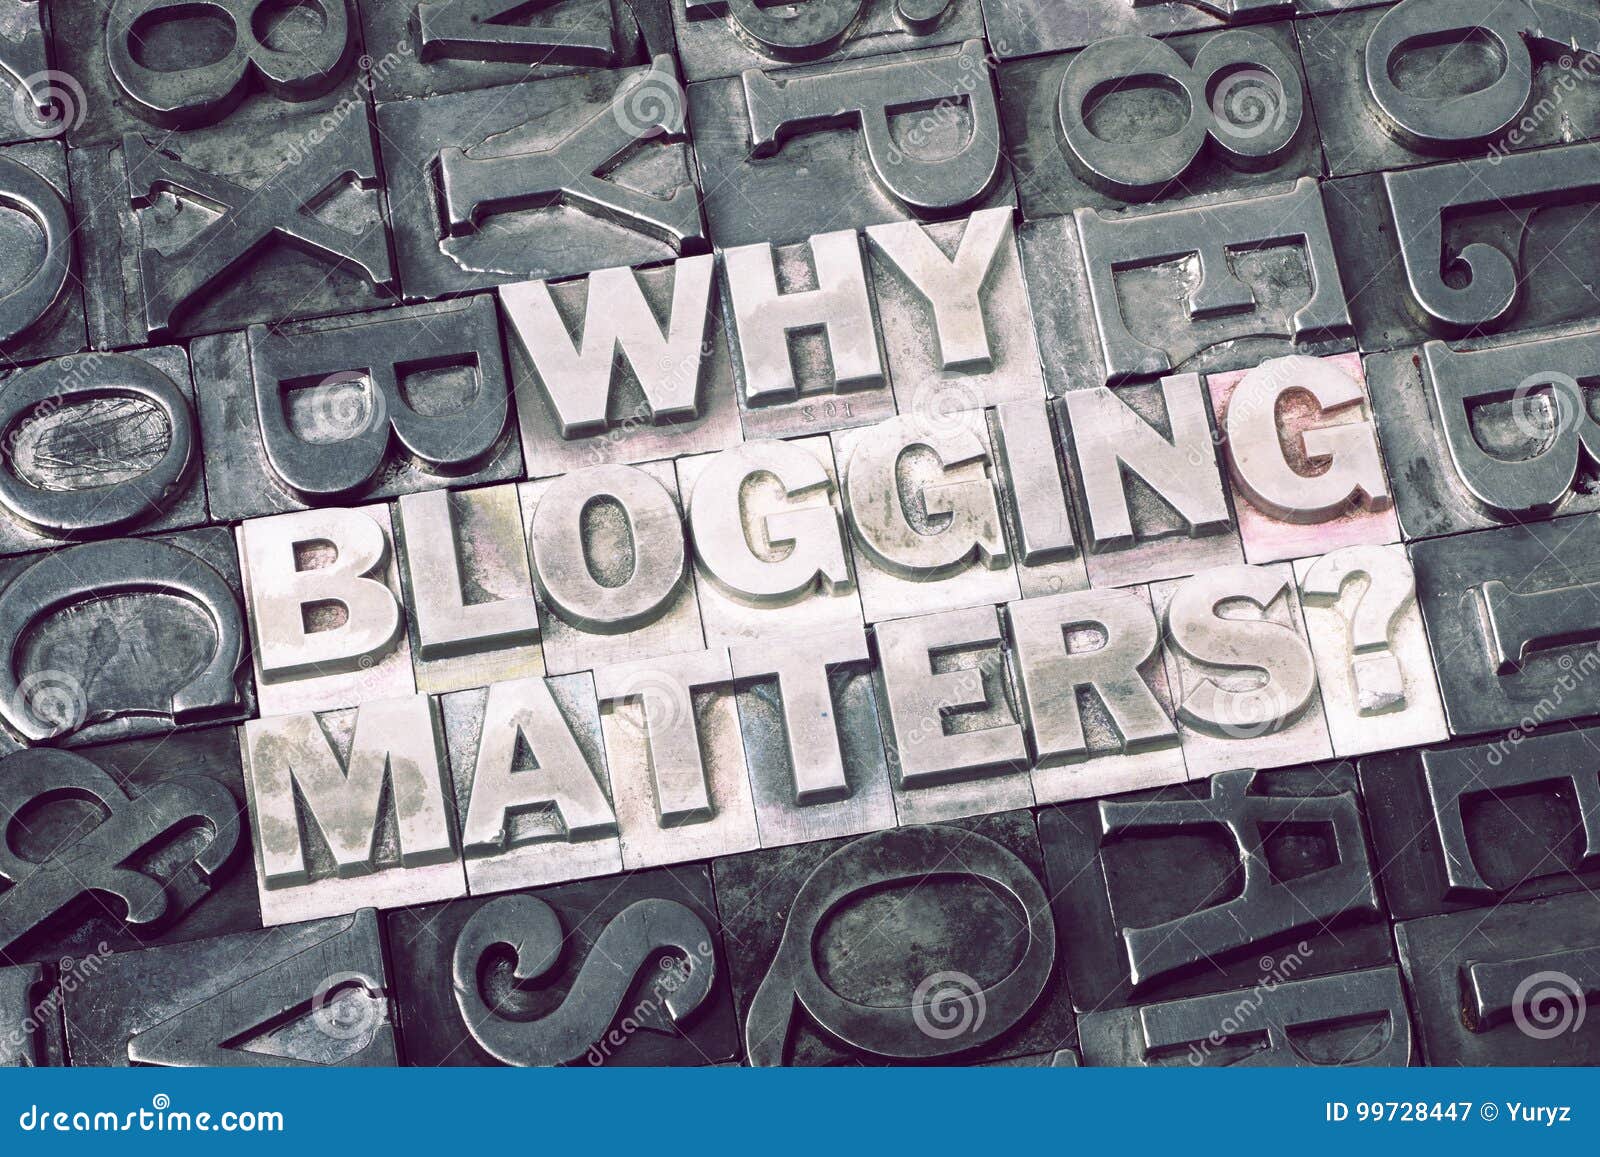 why blogging matters